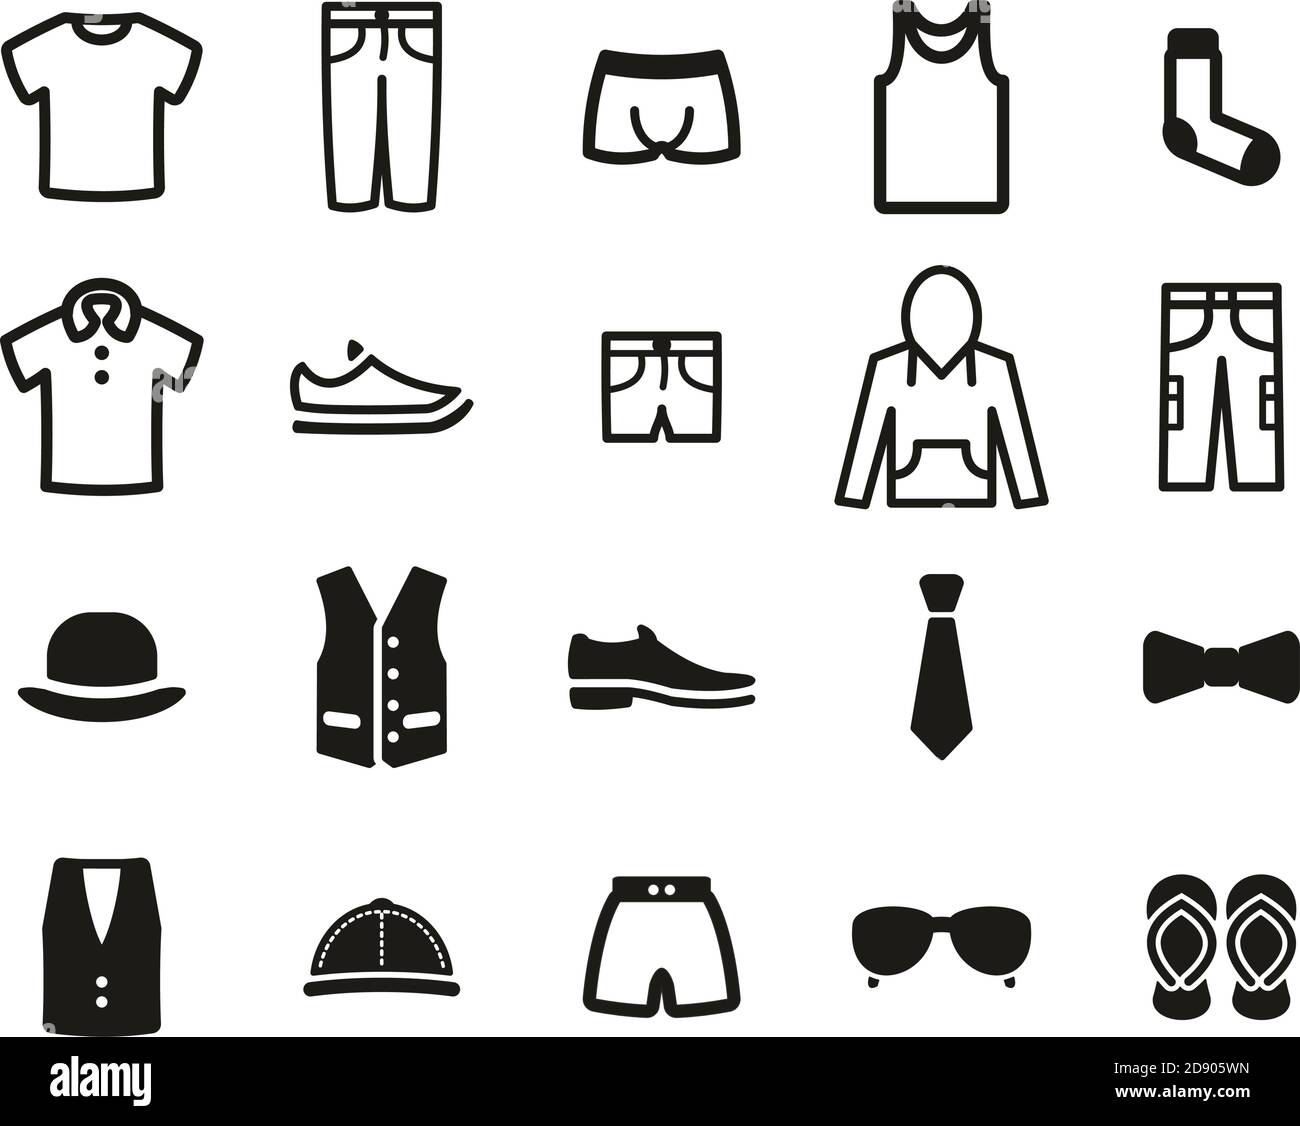 Men´s Clothing & Accessories Icons Black & White Set Big Stock Vector